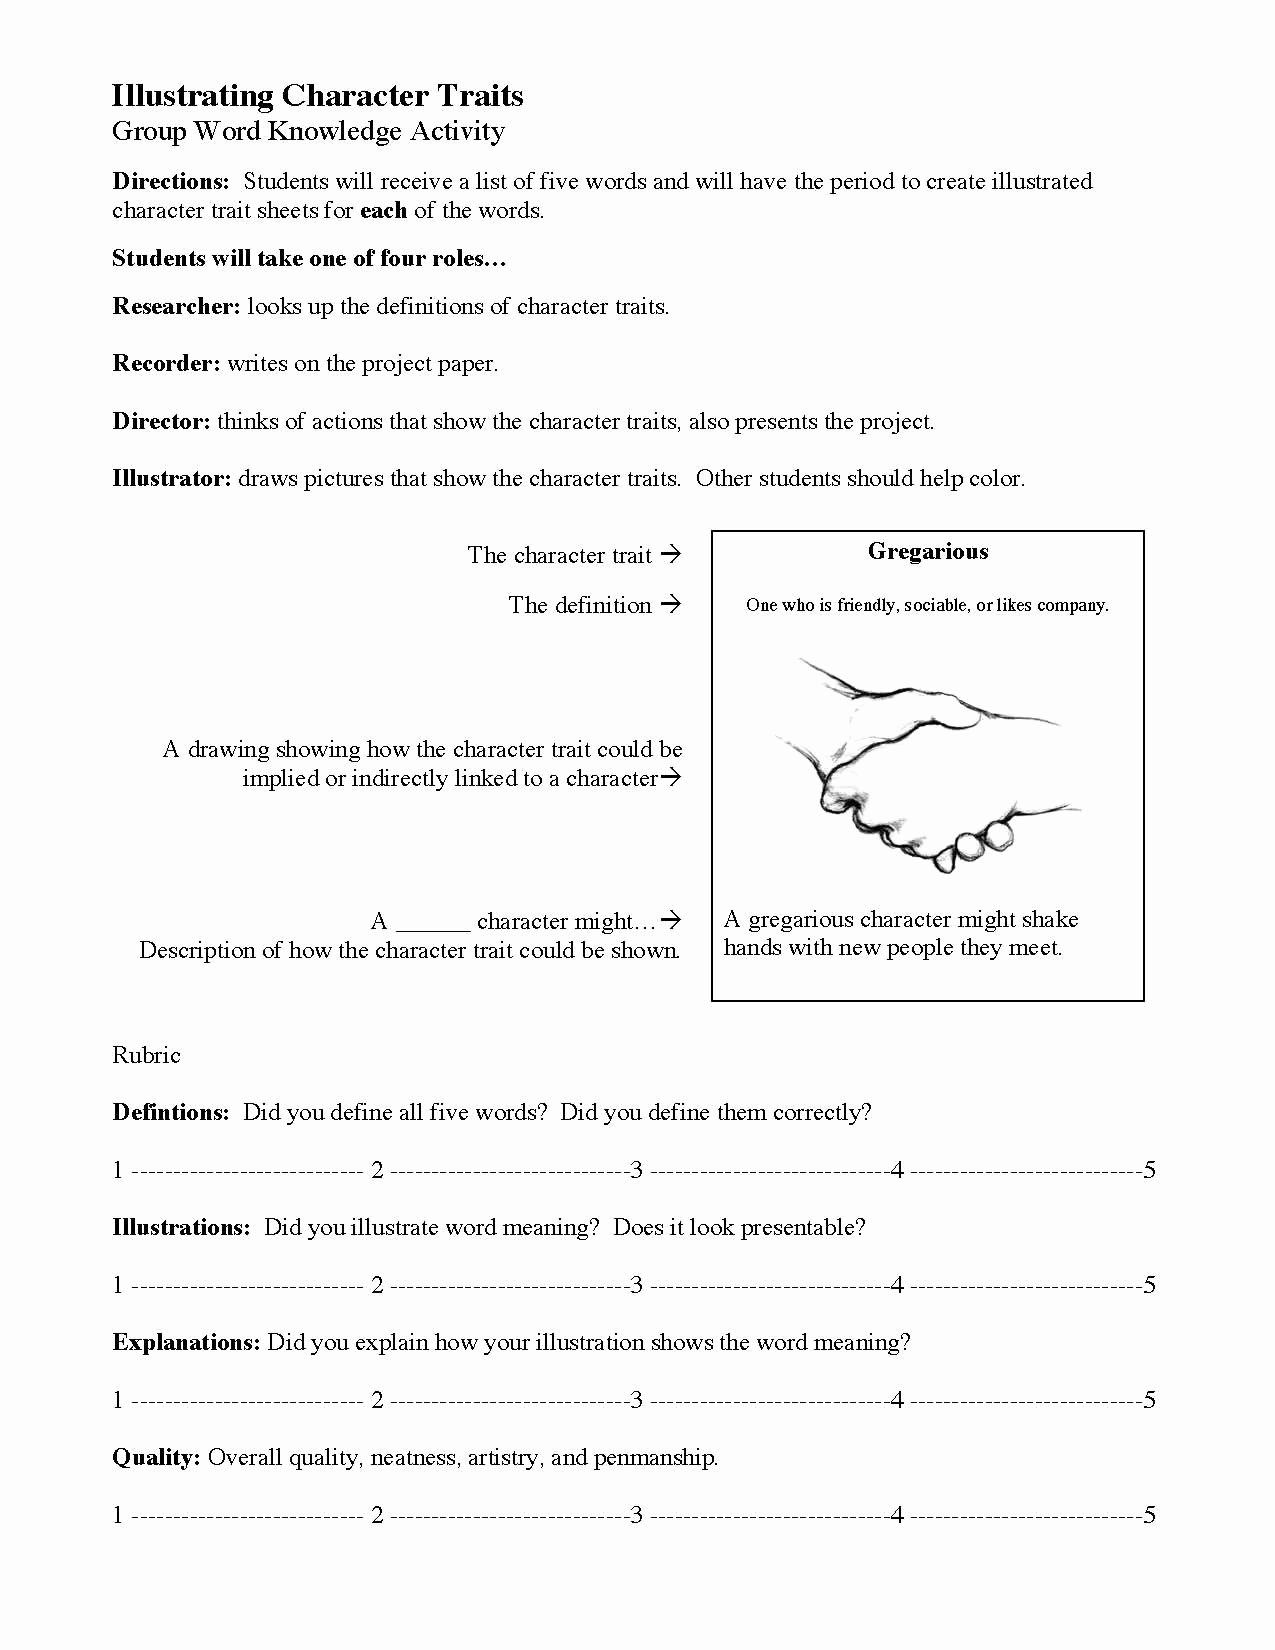 Character Traits Worksheet 2nd Grade Best Of 20 Character Traits Worksheet 2nd Grade